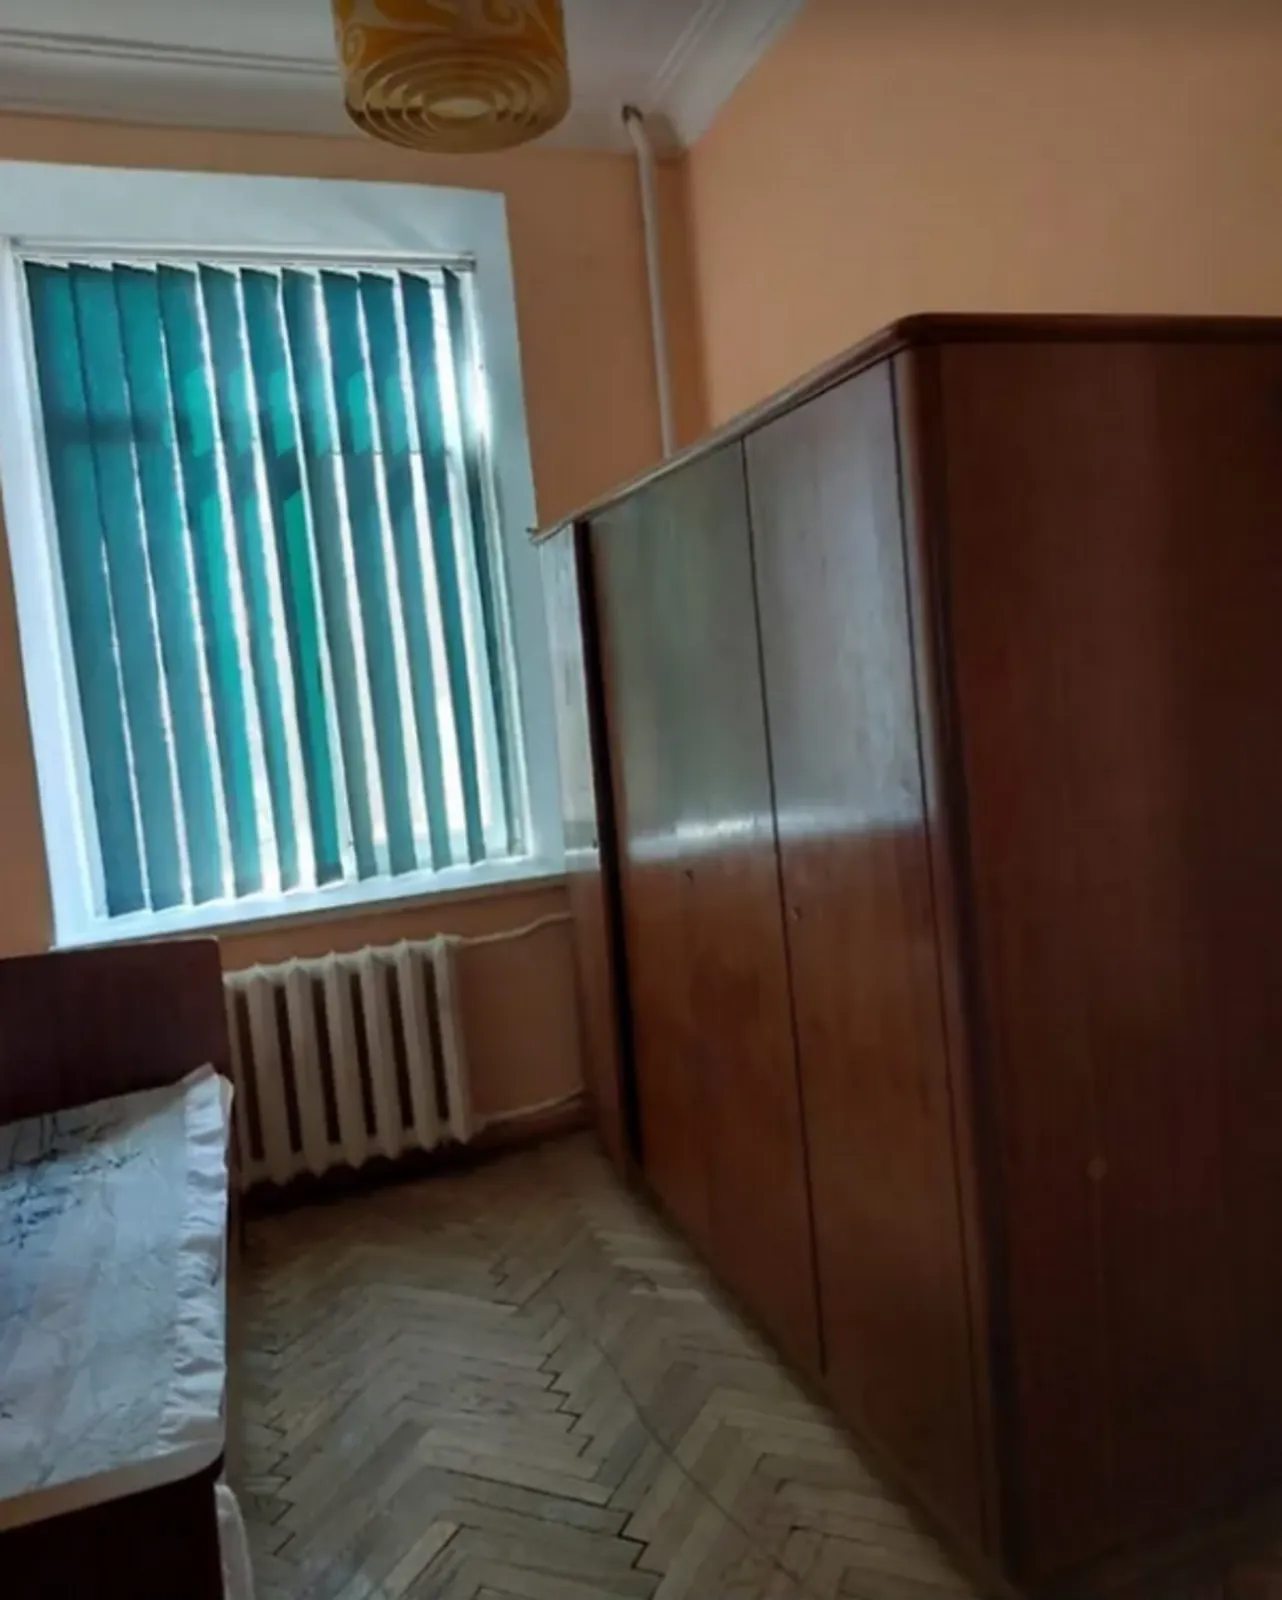 Apartments for sale. 2 rooms, 50 m², 2nd floor/5 floors. Tsentr, Ternopil. 